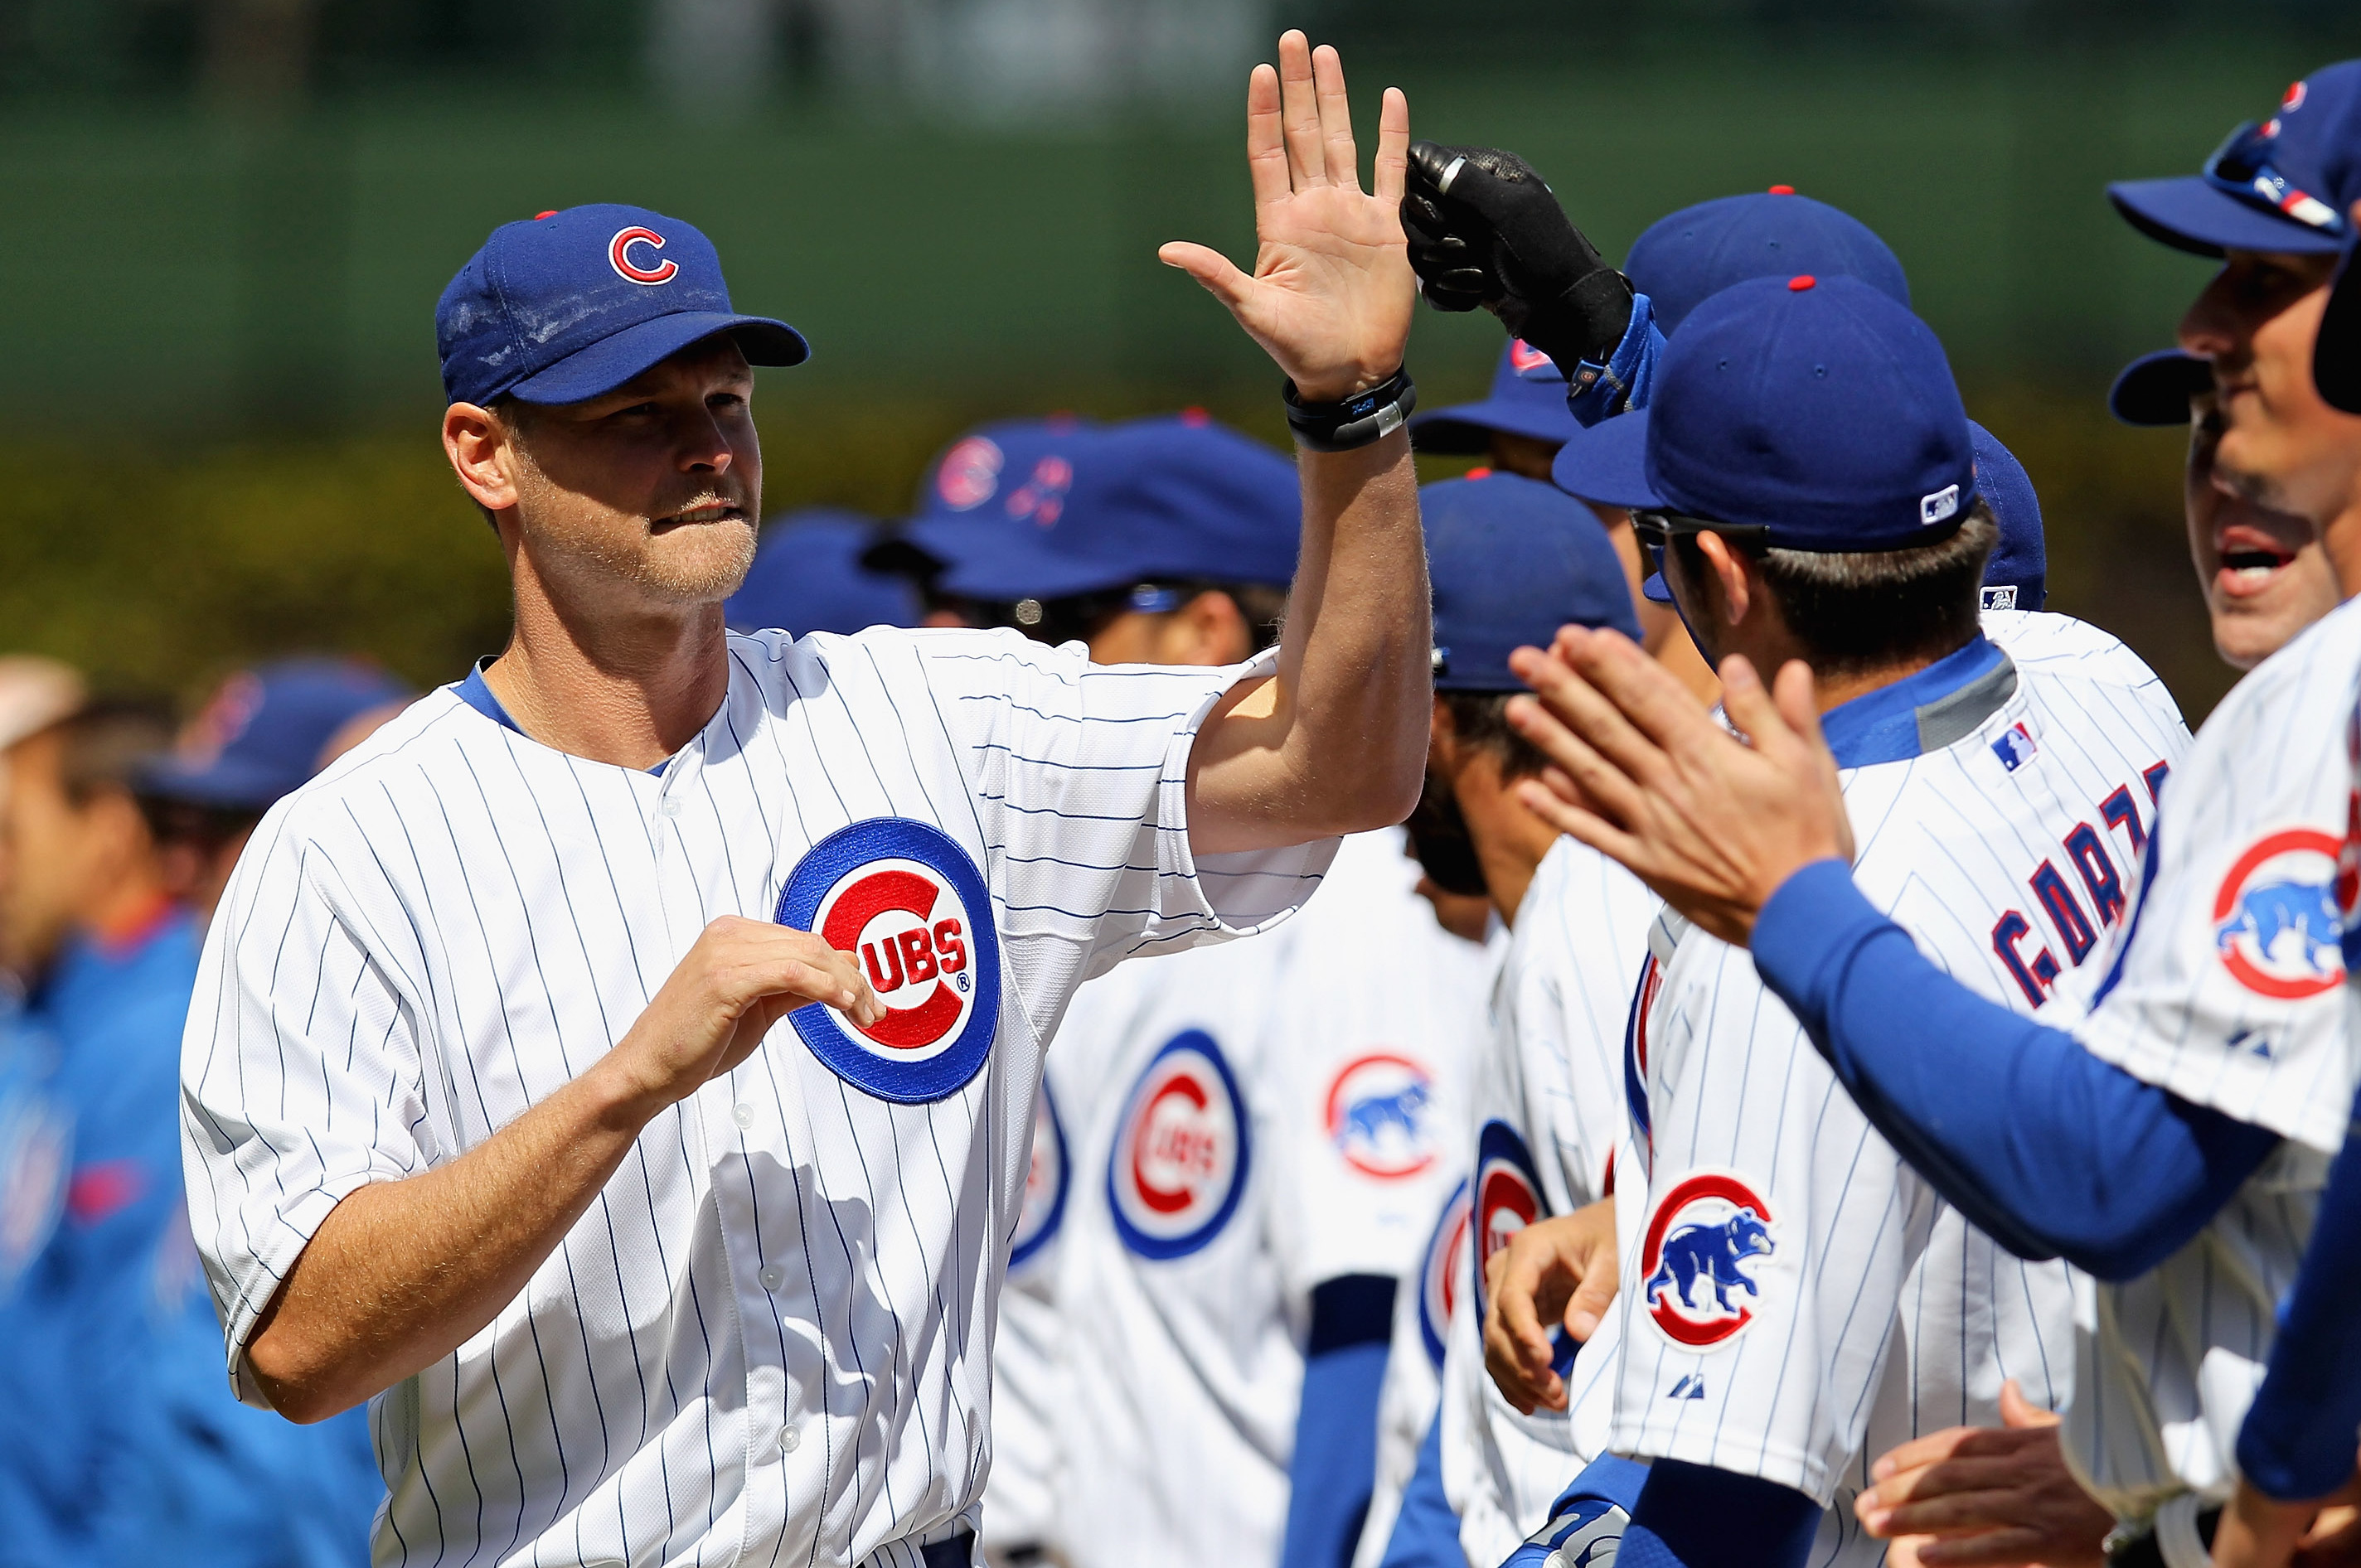 Kerry Wood returning to Cubs - Sports Illustrated